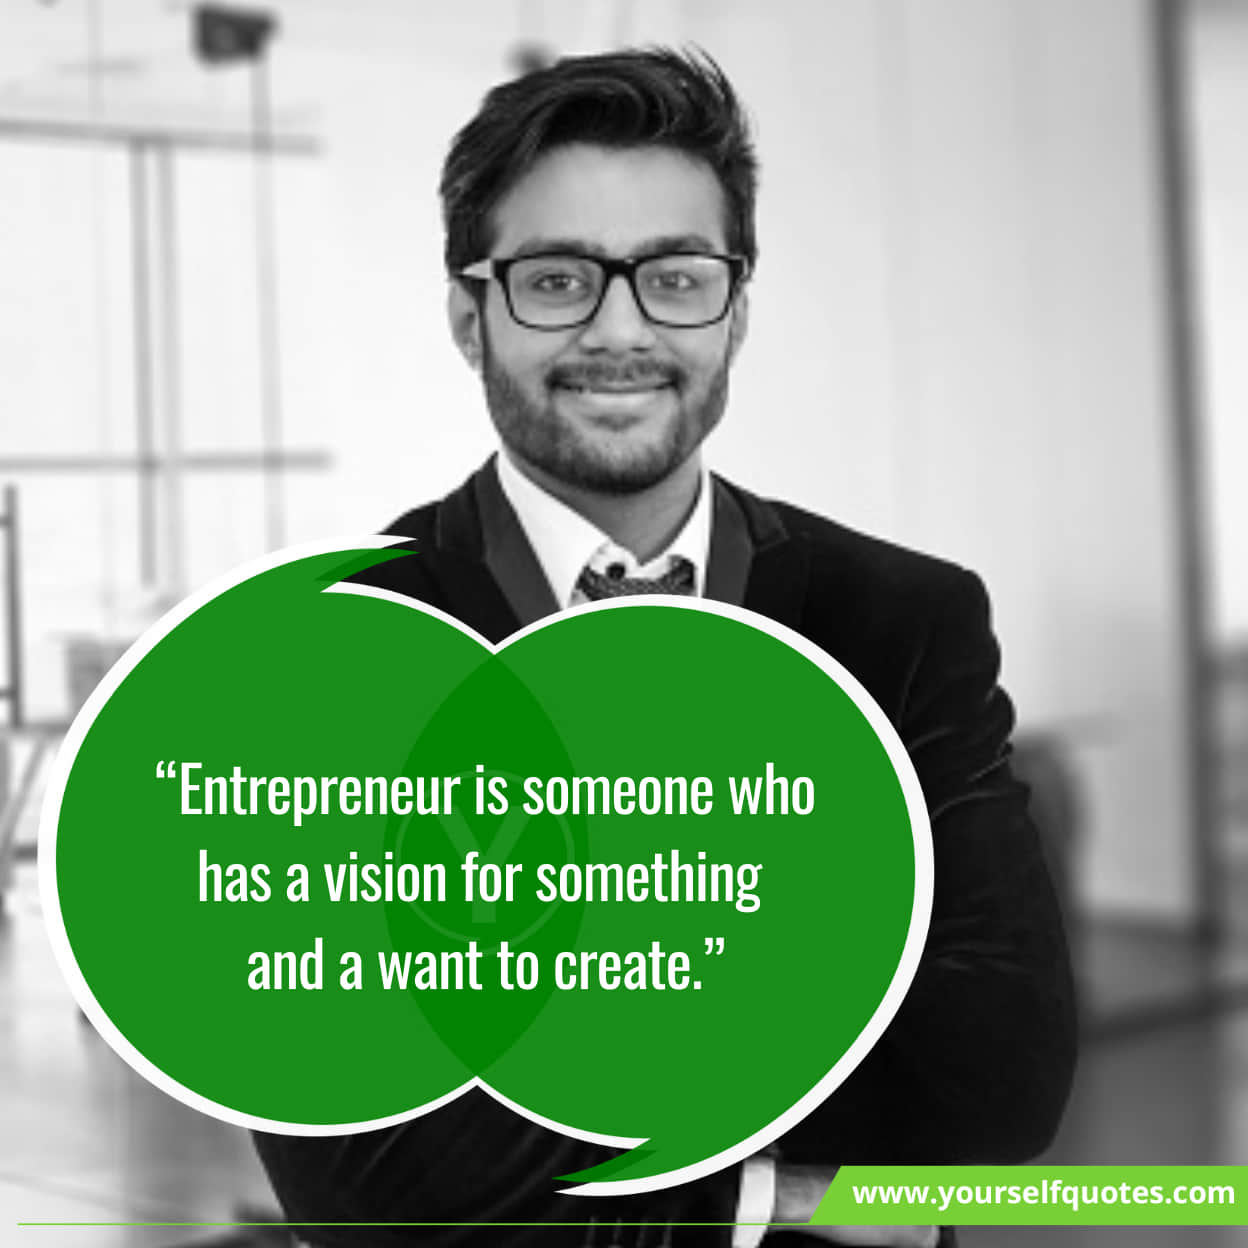 Latest Quotes for Young Entrepreneurs